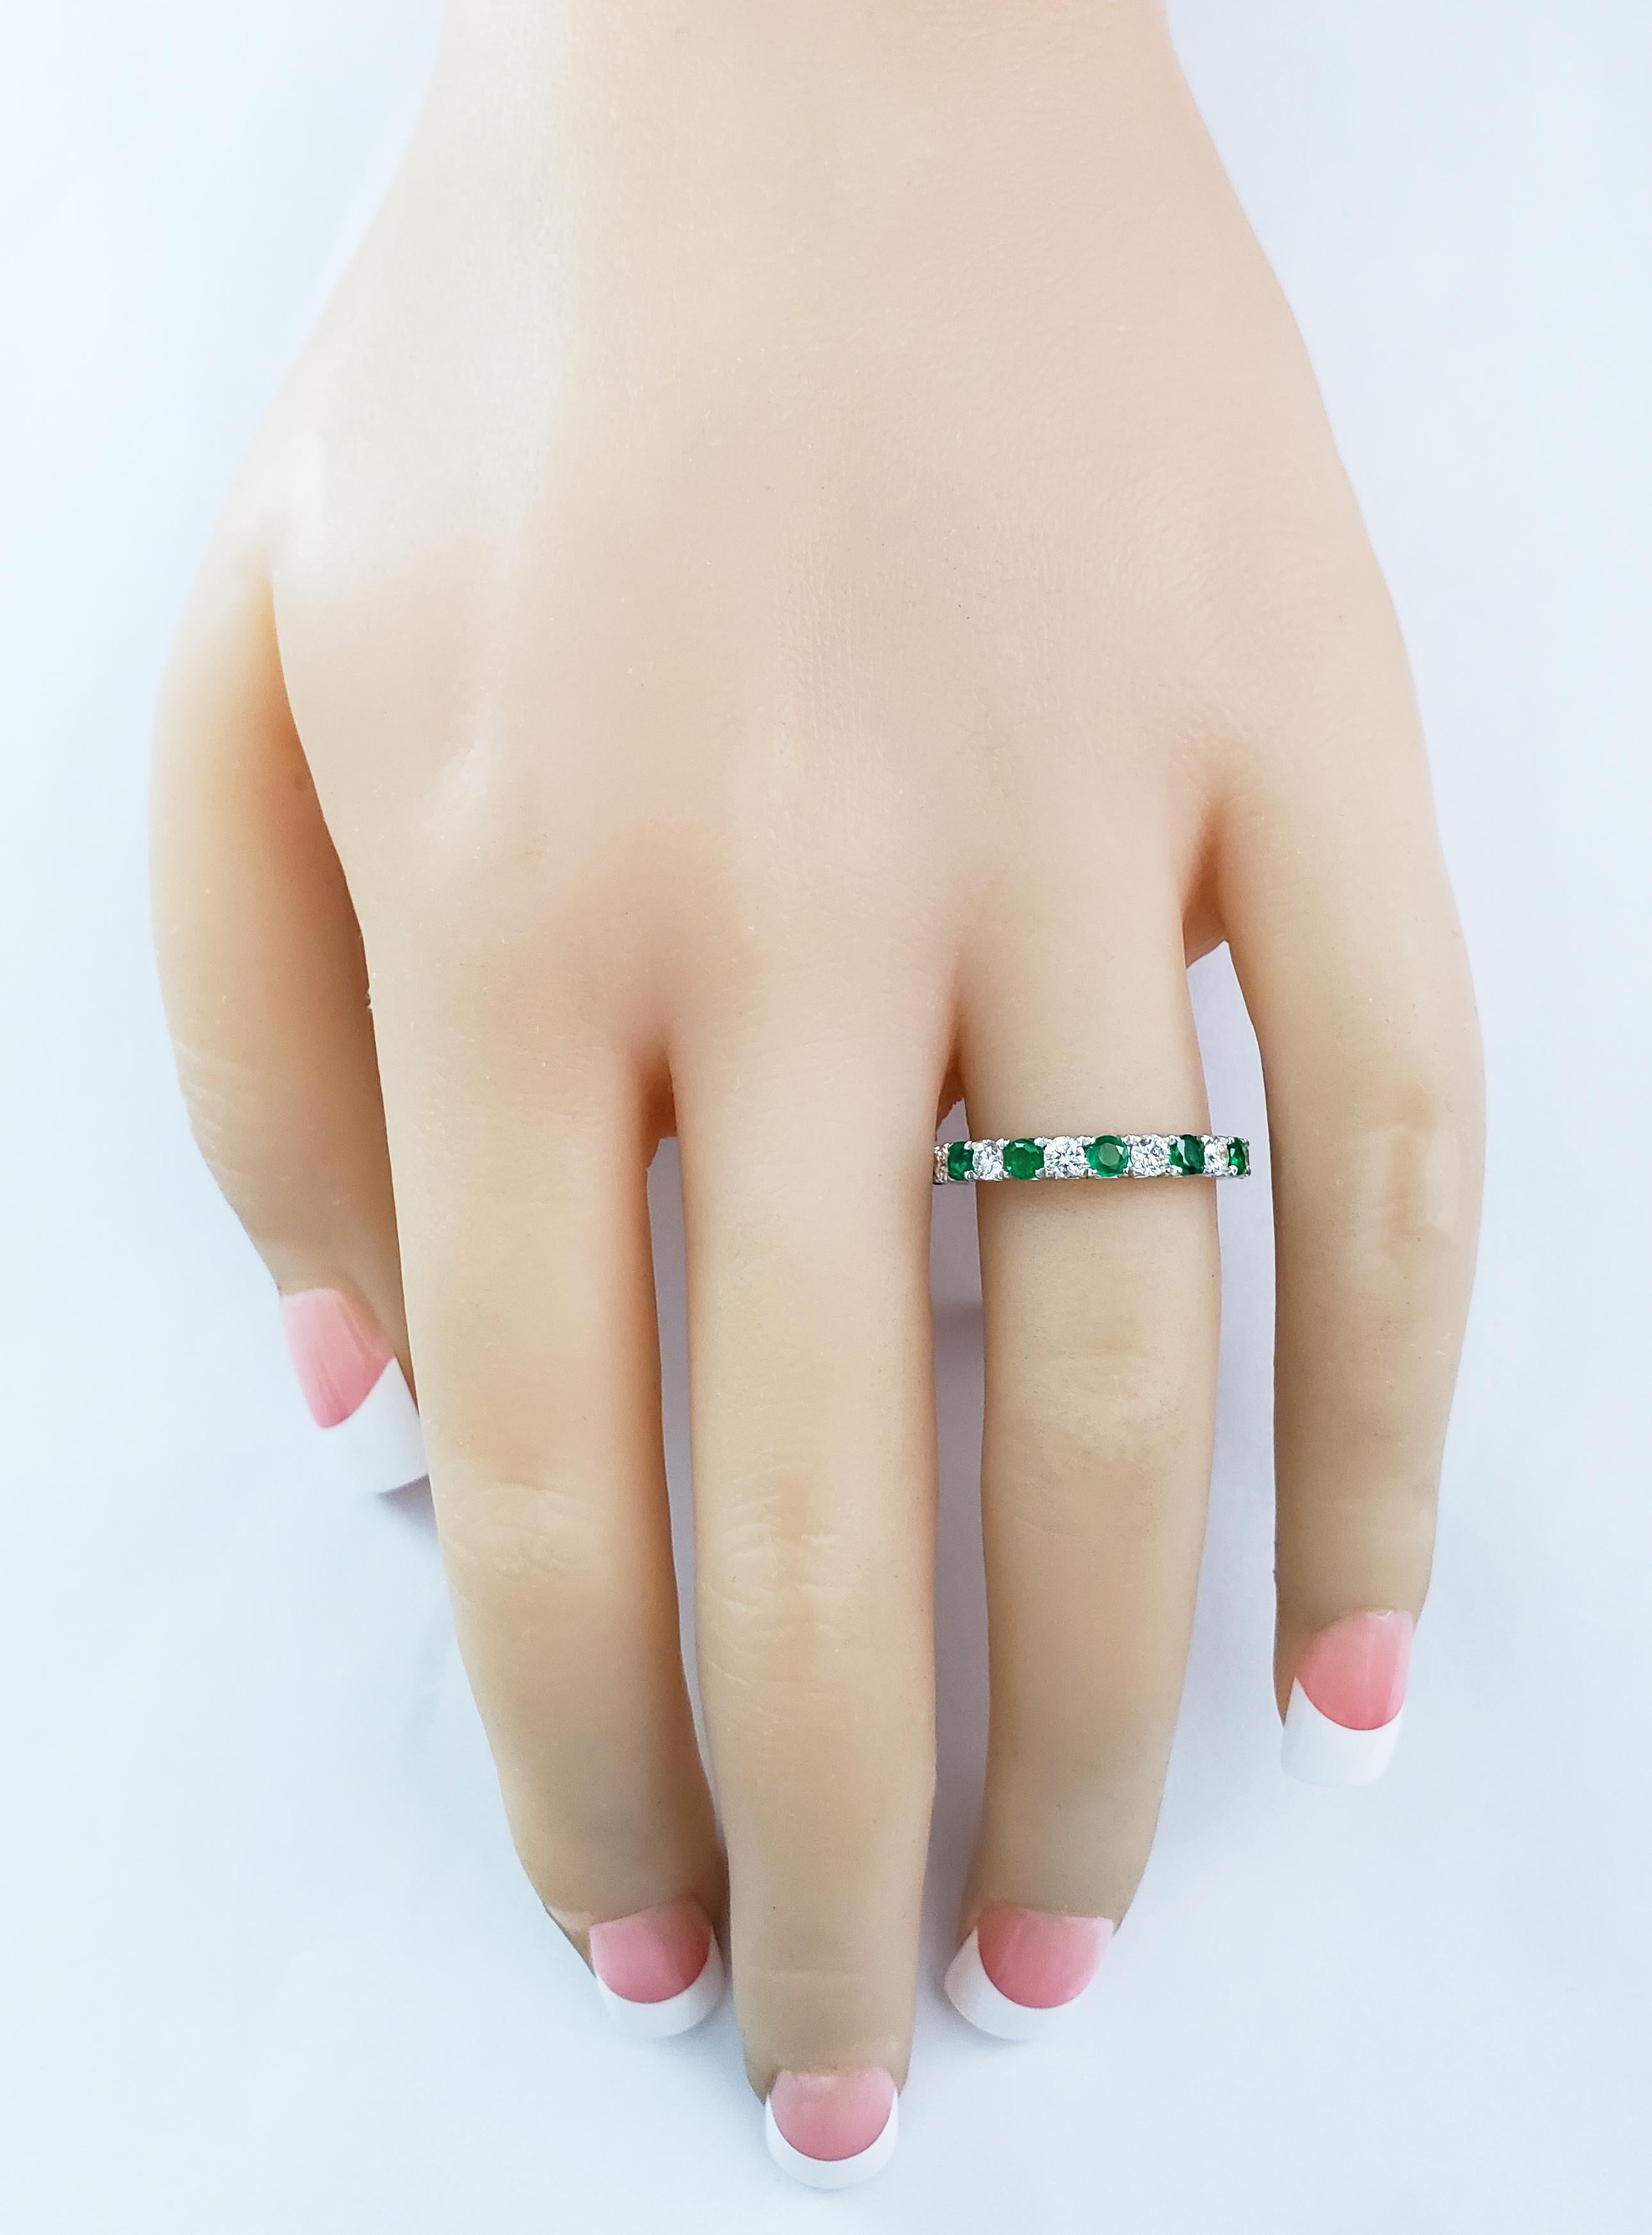 this gorgeous emerald and diamond wedding ring features 7 vibrant green emeralds alternating with 6 brilliant diamonds, all securely set in a french pave style setting. Fashioned in 18 karat white gold. Sizable upon request. 

Style available in